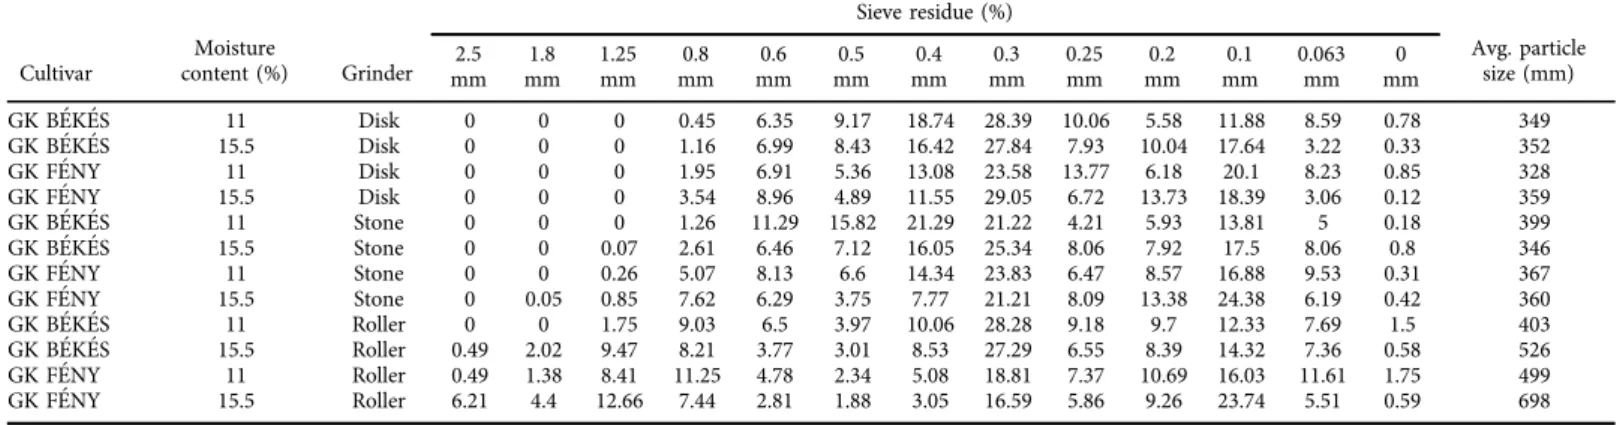 Table 2. The results of sieve analysis Cultivar Moisture content (%) Grinder Sieve residue (%) Avg